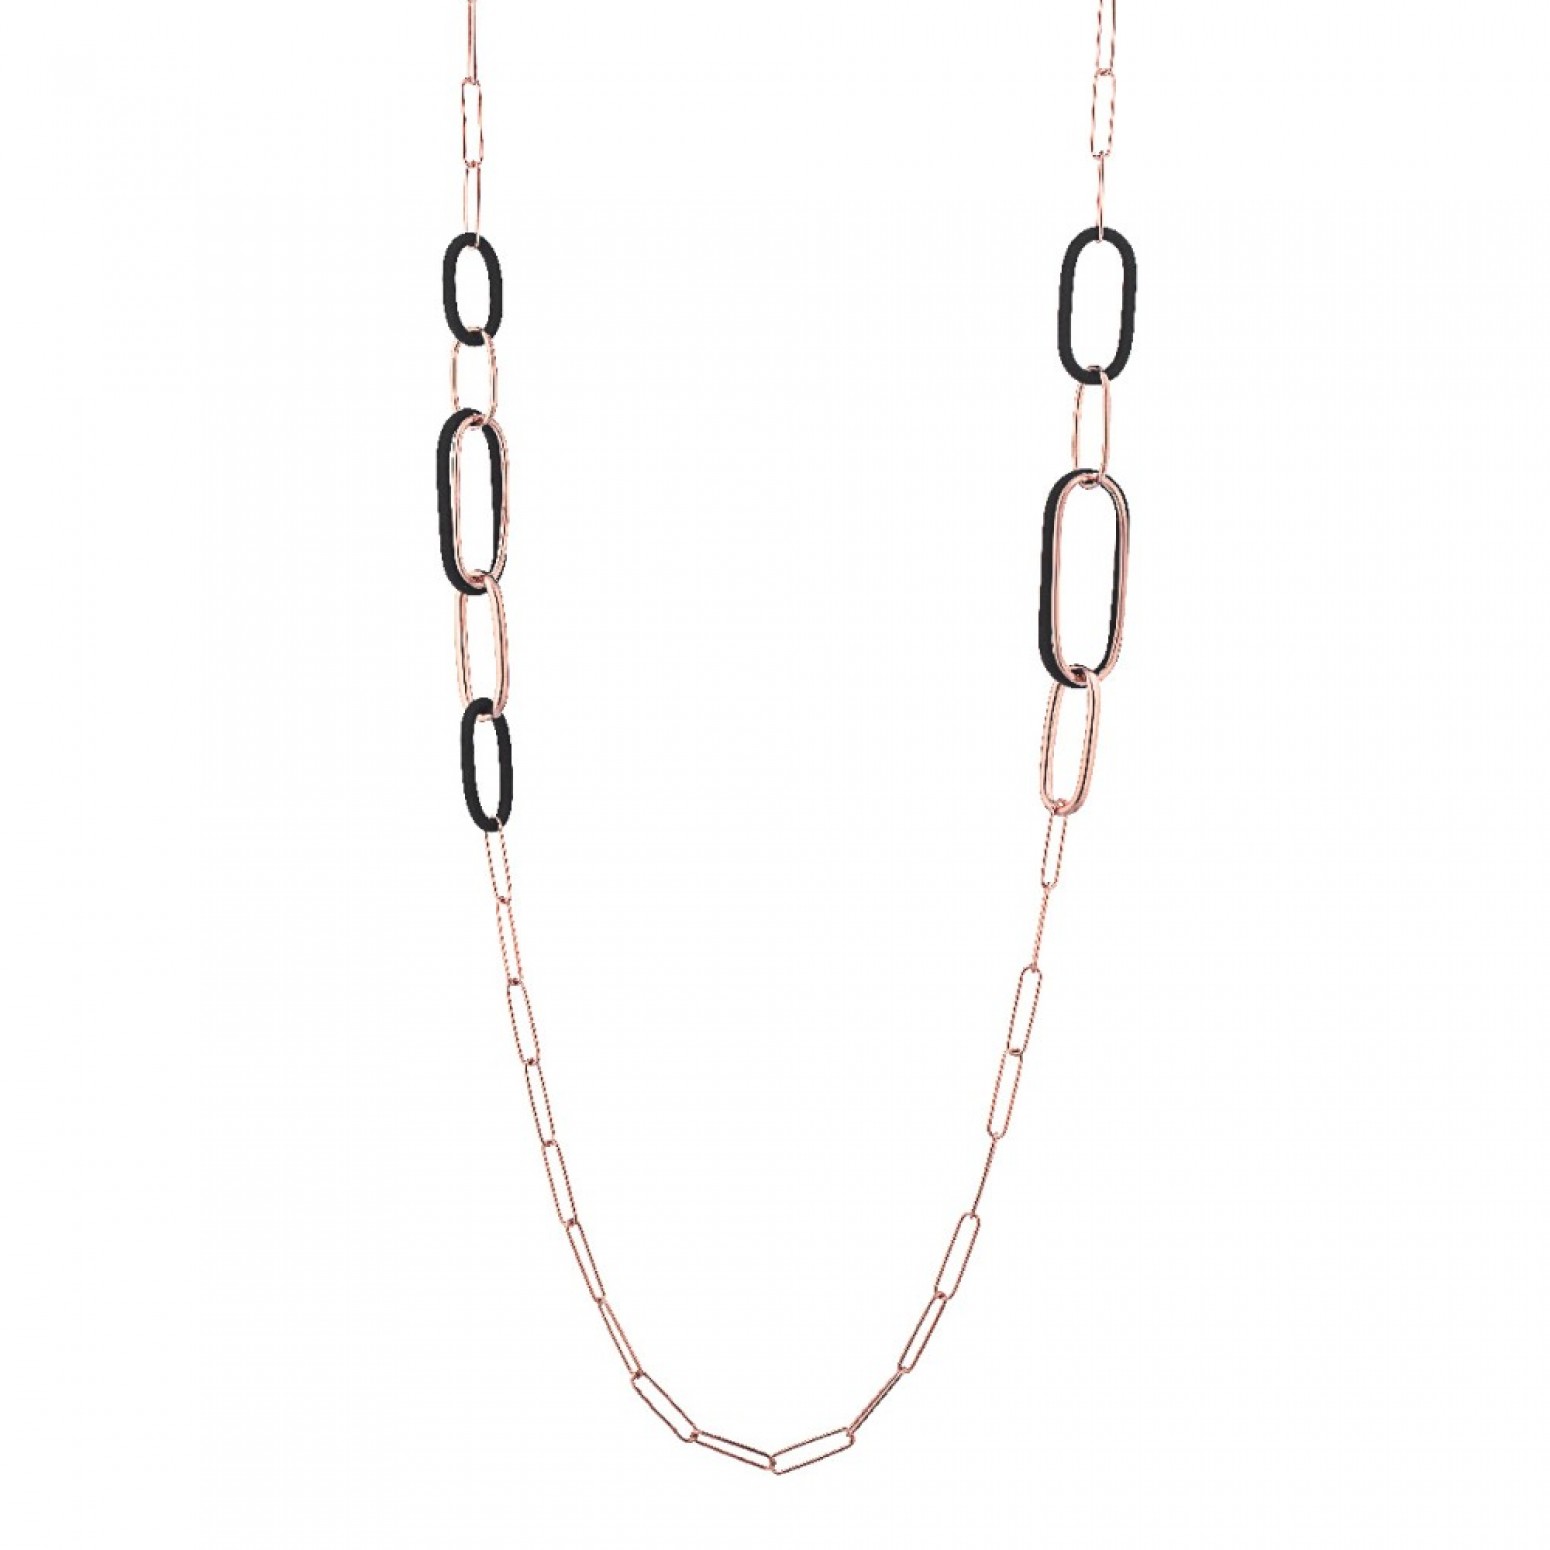 Marcello Pane necklace with gold plated silver, CLPR 021, ko5703 NECKLACES Κοσμηματα - chrilia.gr